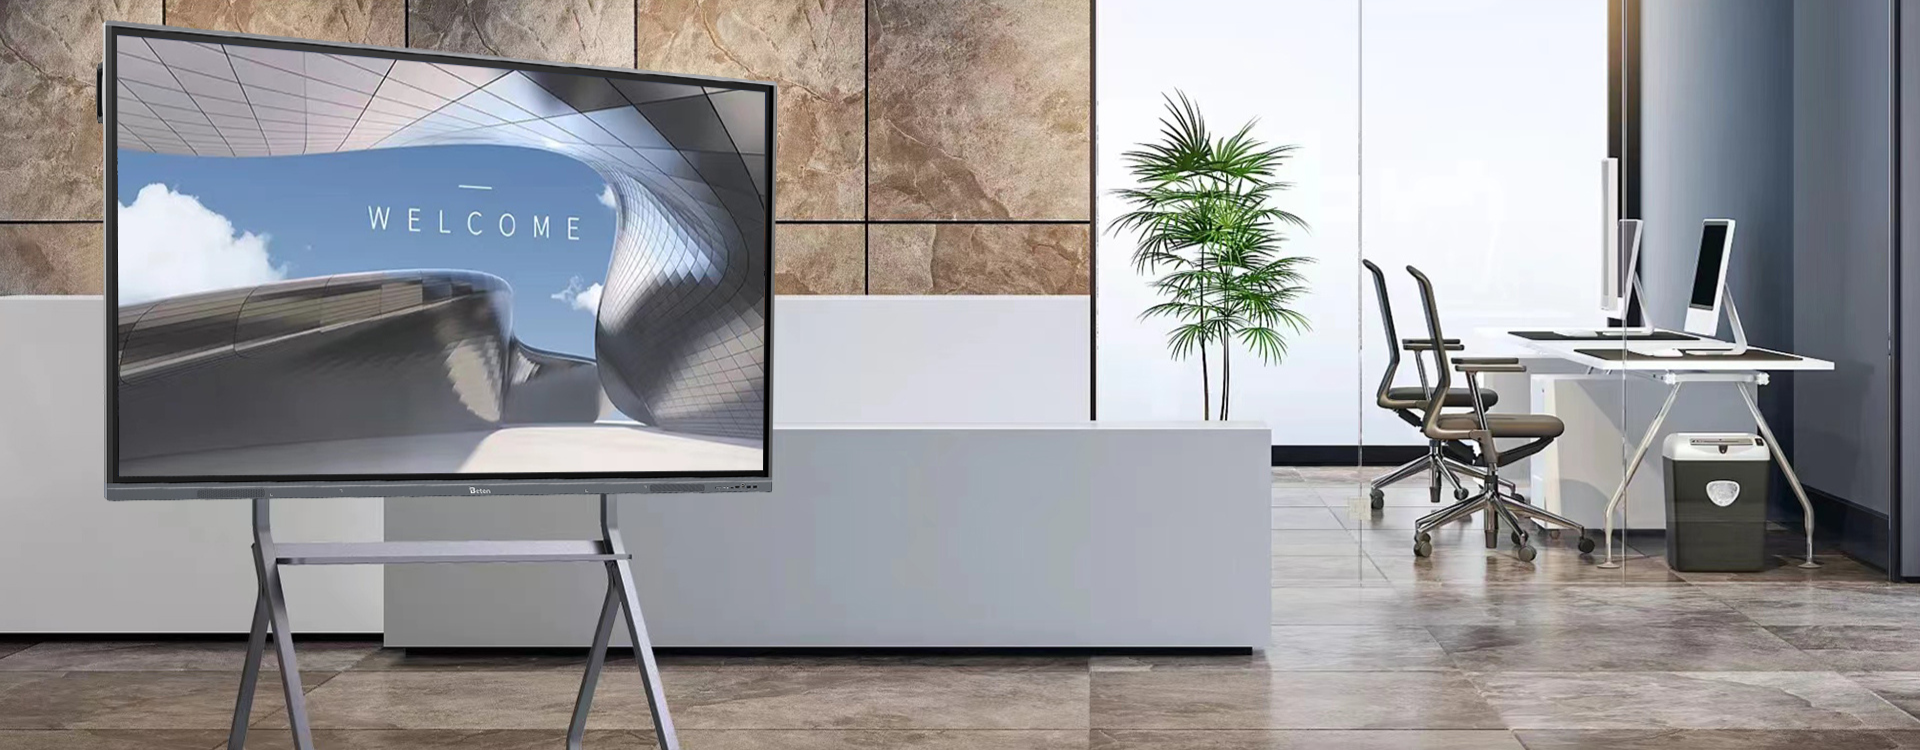 I series interactive flat panel in office